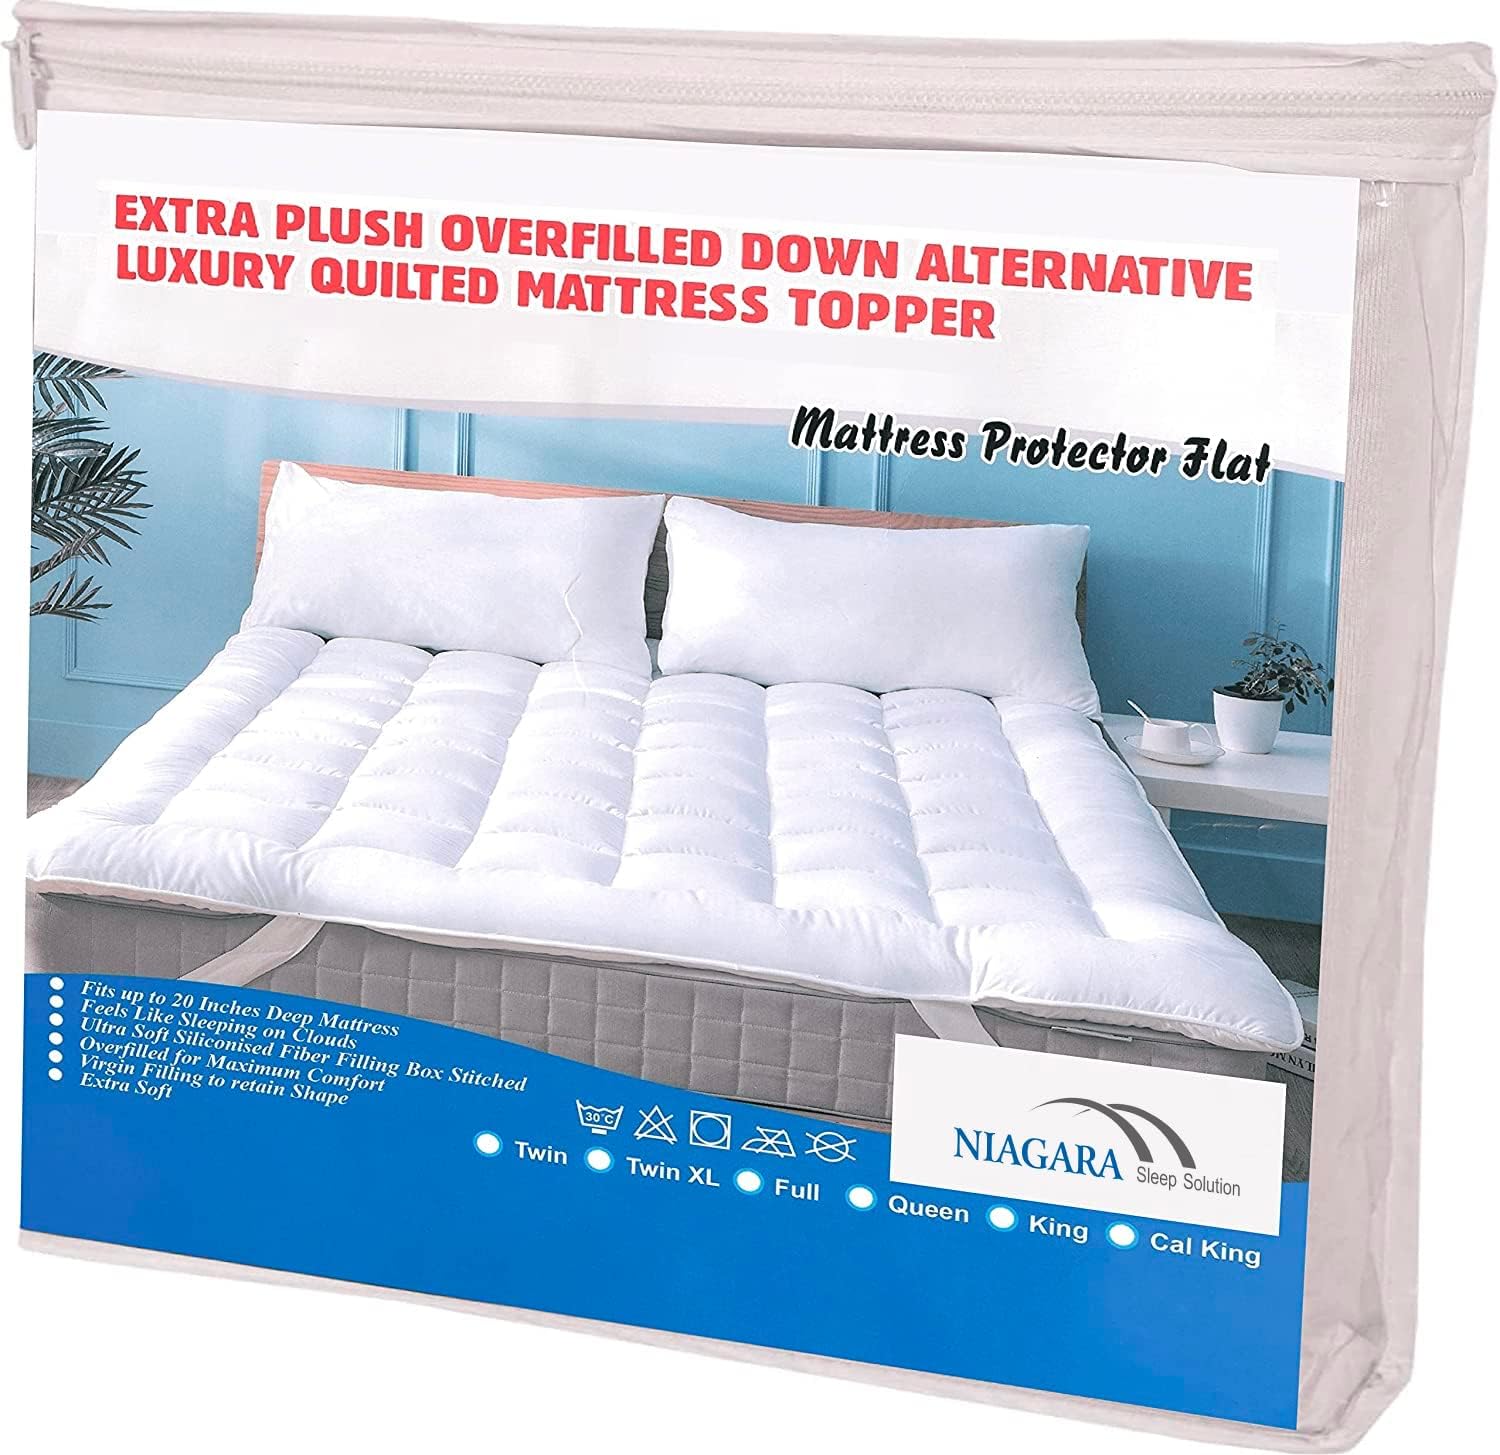 Mattress Topper Twin 2inches Gusset 39x75 Inches 2 Inches Thick Plush Down Alternative Quilted Fitted Skirt Protector Mattress Pad Reviver Enhancer (Microfiber, Twin 2 Inches Gusset)